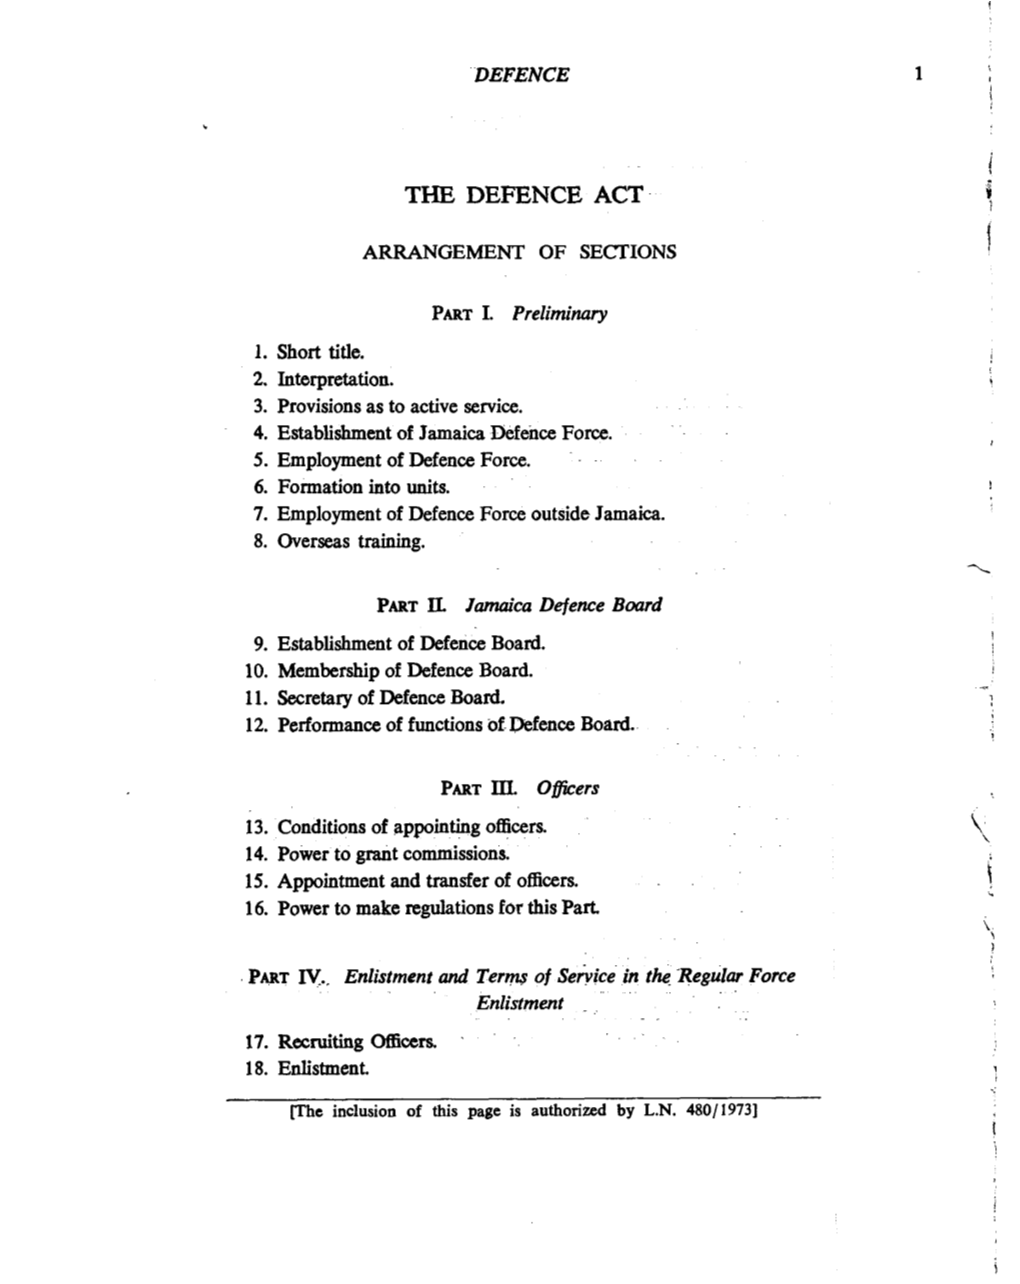 The Defence Act